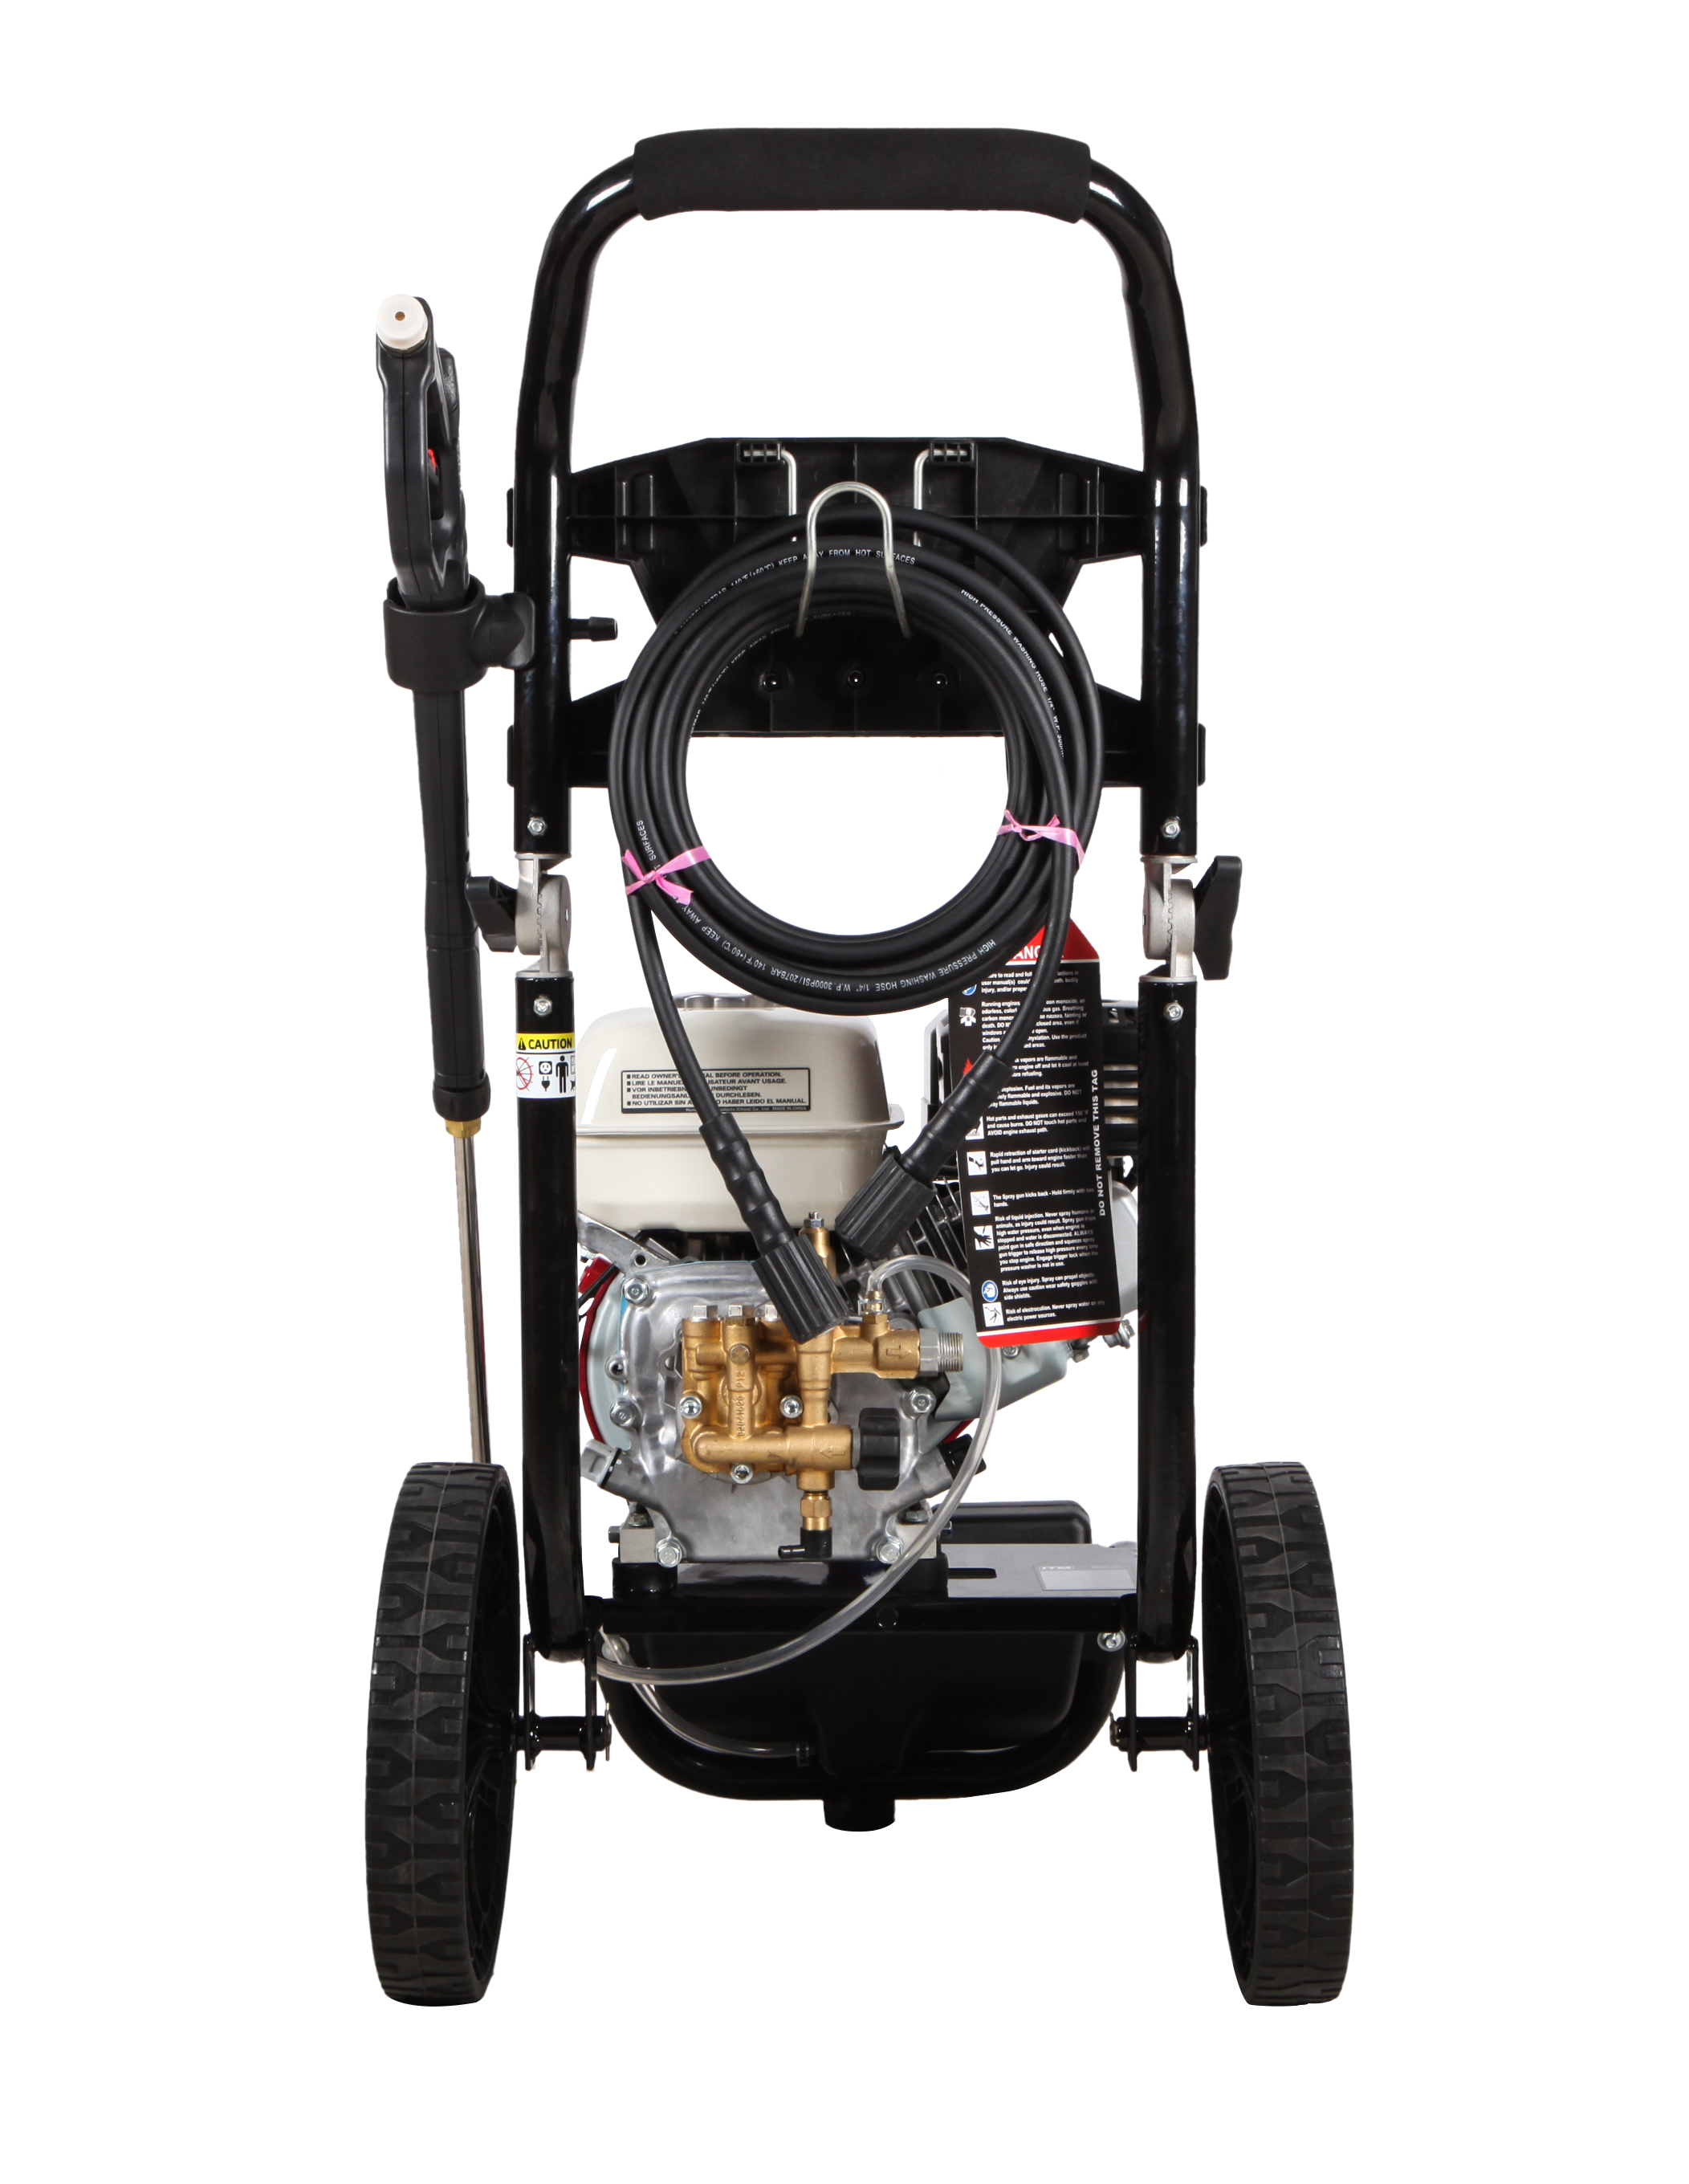 FPGPW3200H-F 3200PSI 220bar Gasoline High Pressure Washer Powered by HONDA G200